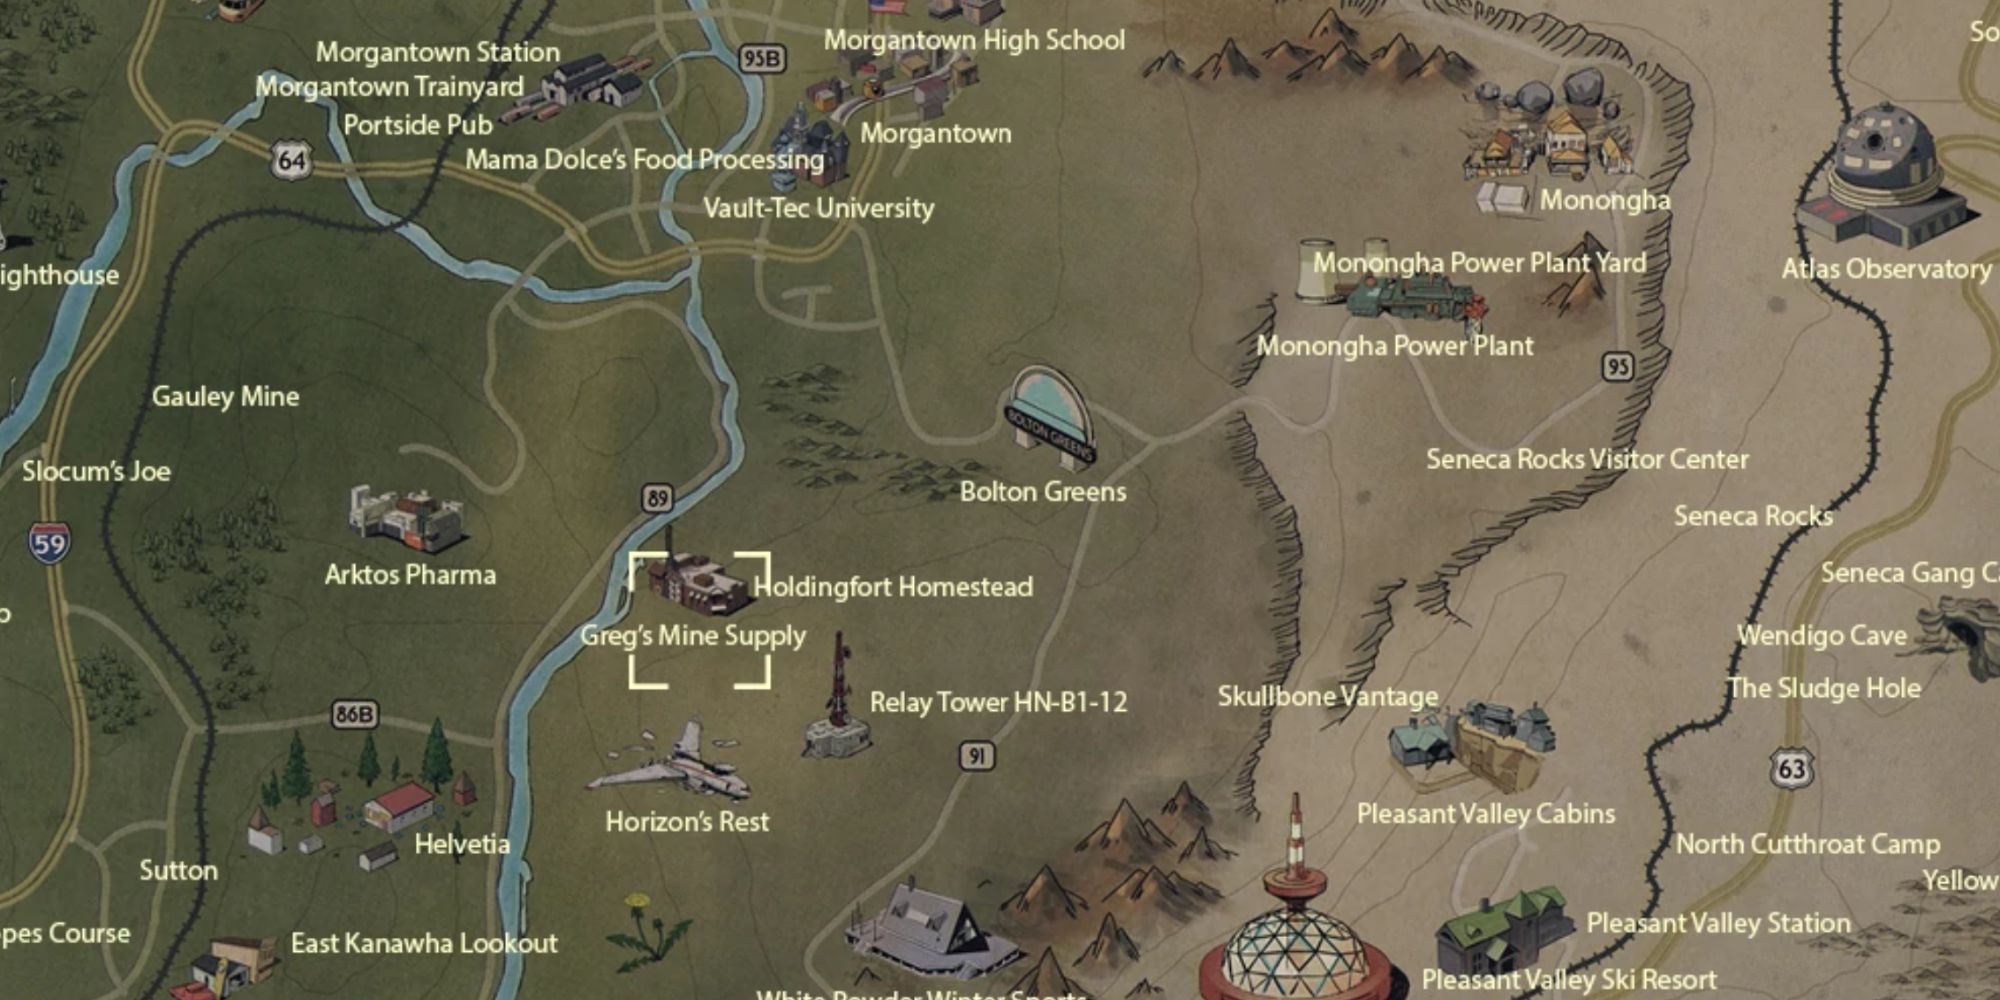 fallout_76_greg's_mine_supply_on_the_map